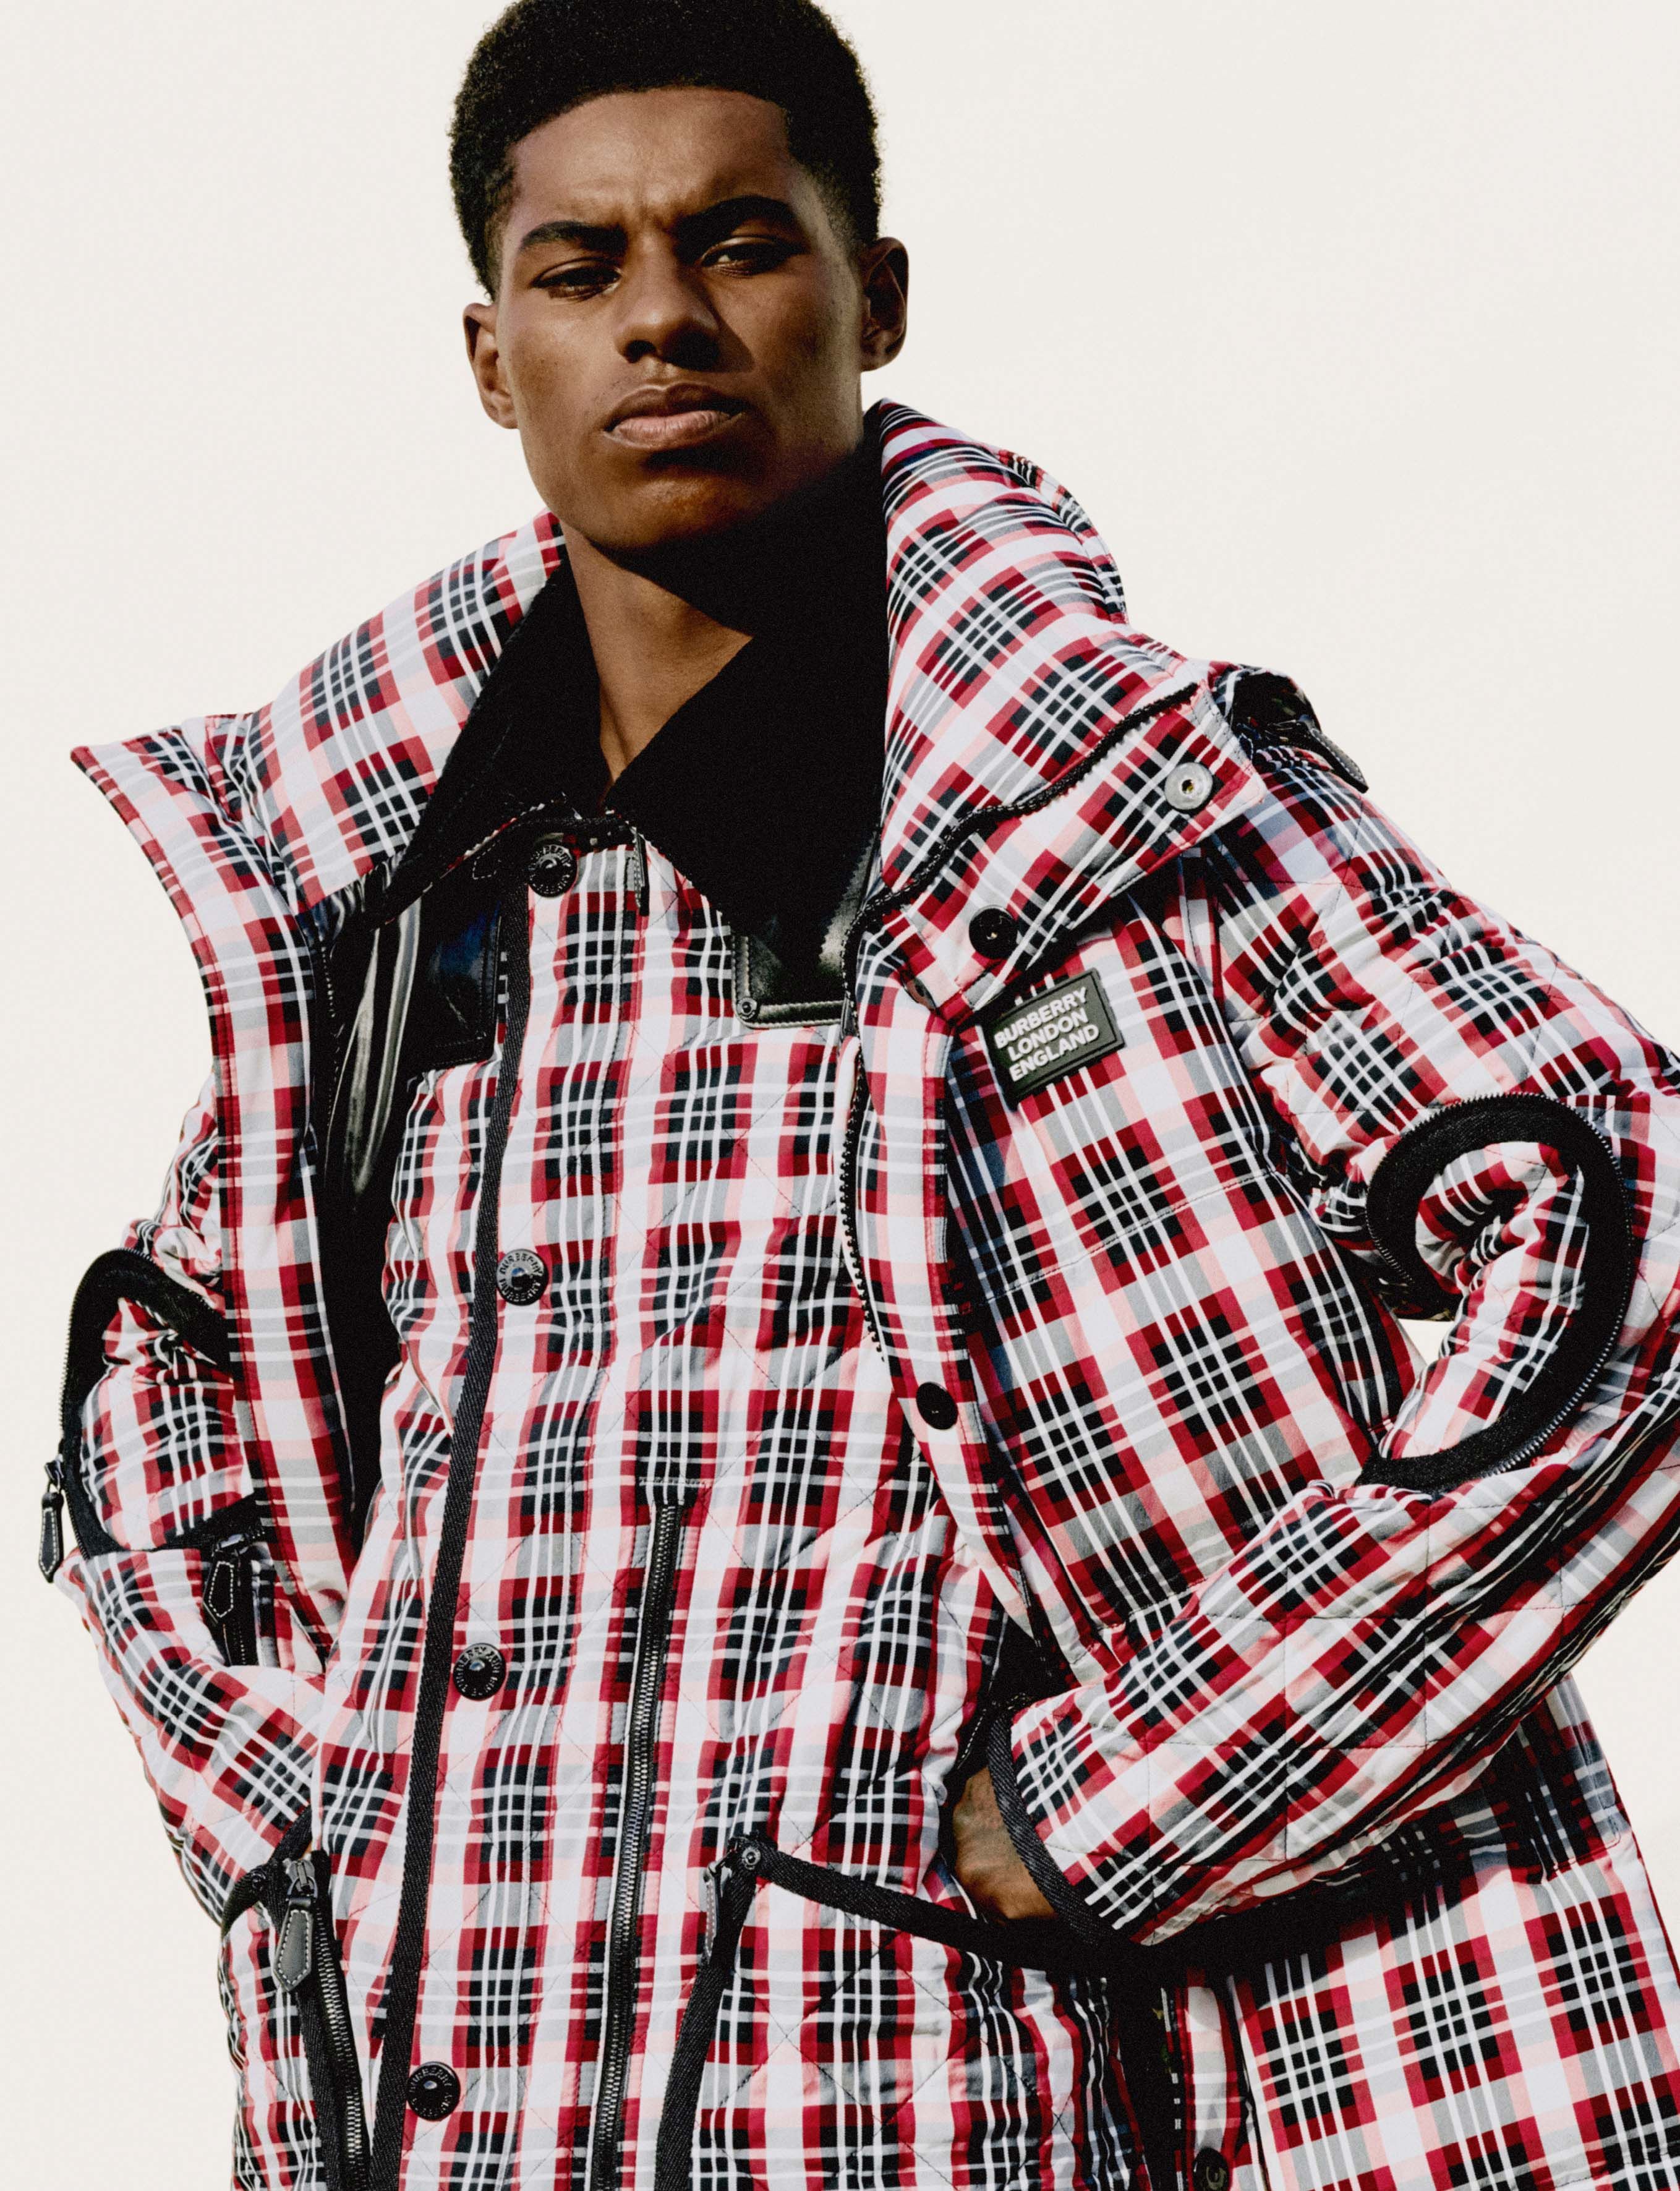 Burberry launches first Marcus Rashford campaign, focuses on creativity